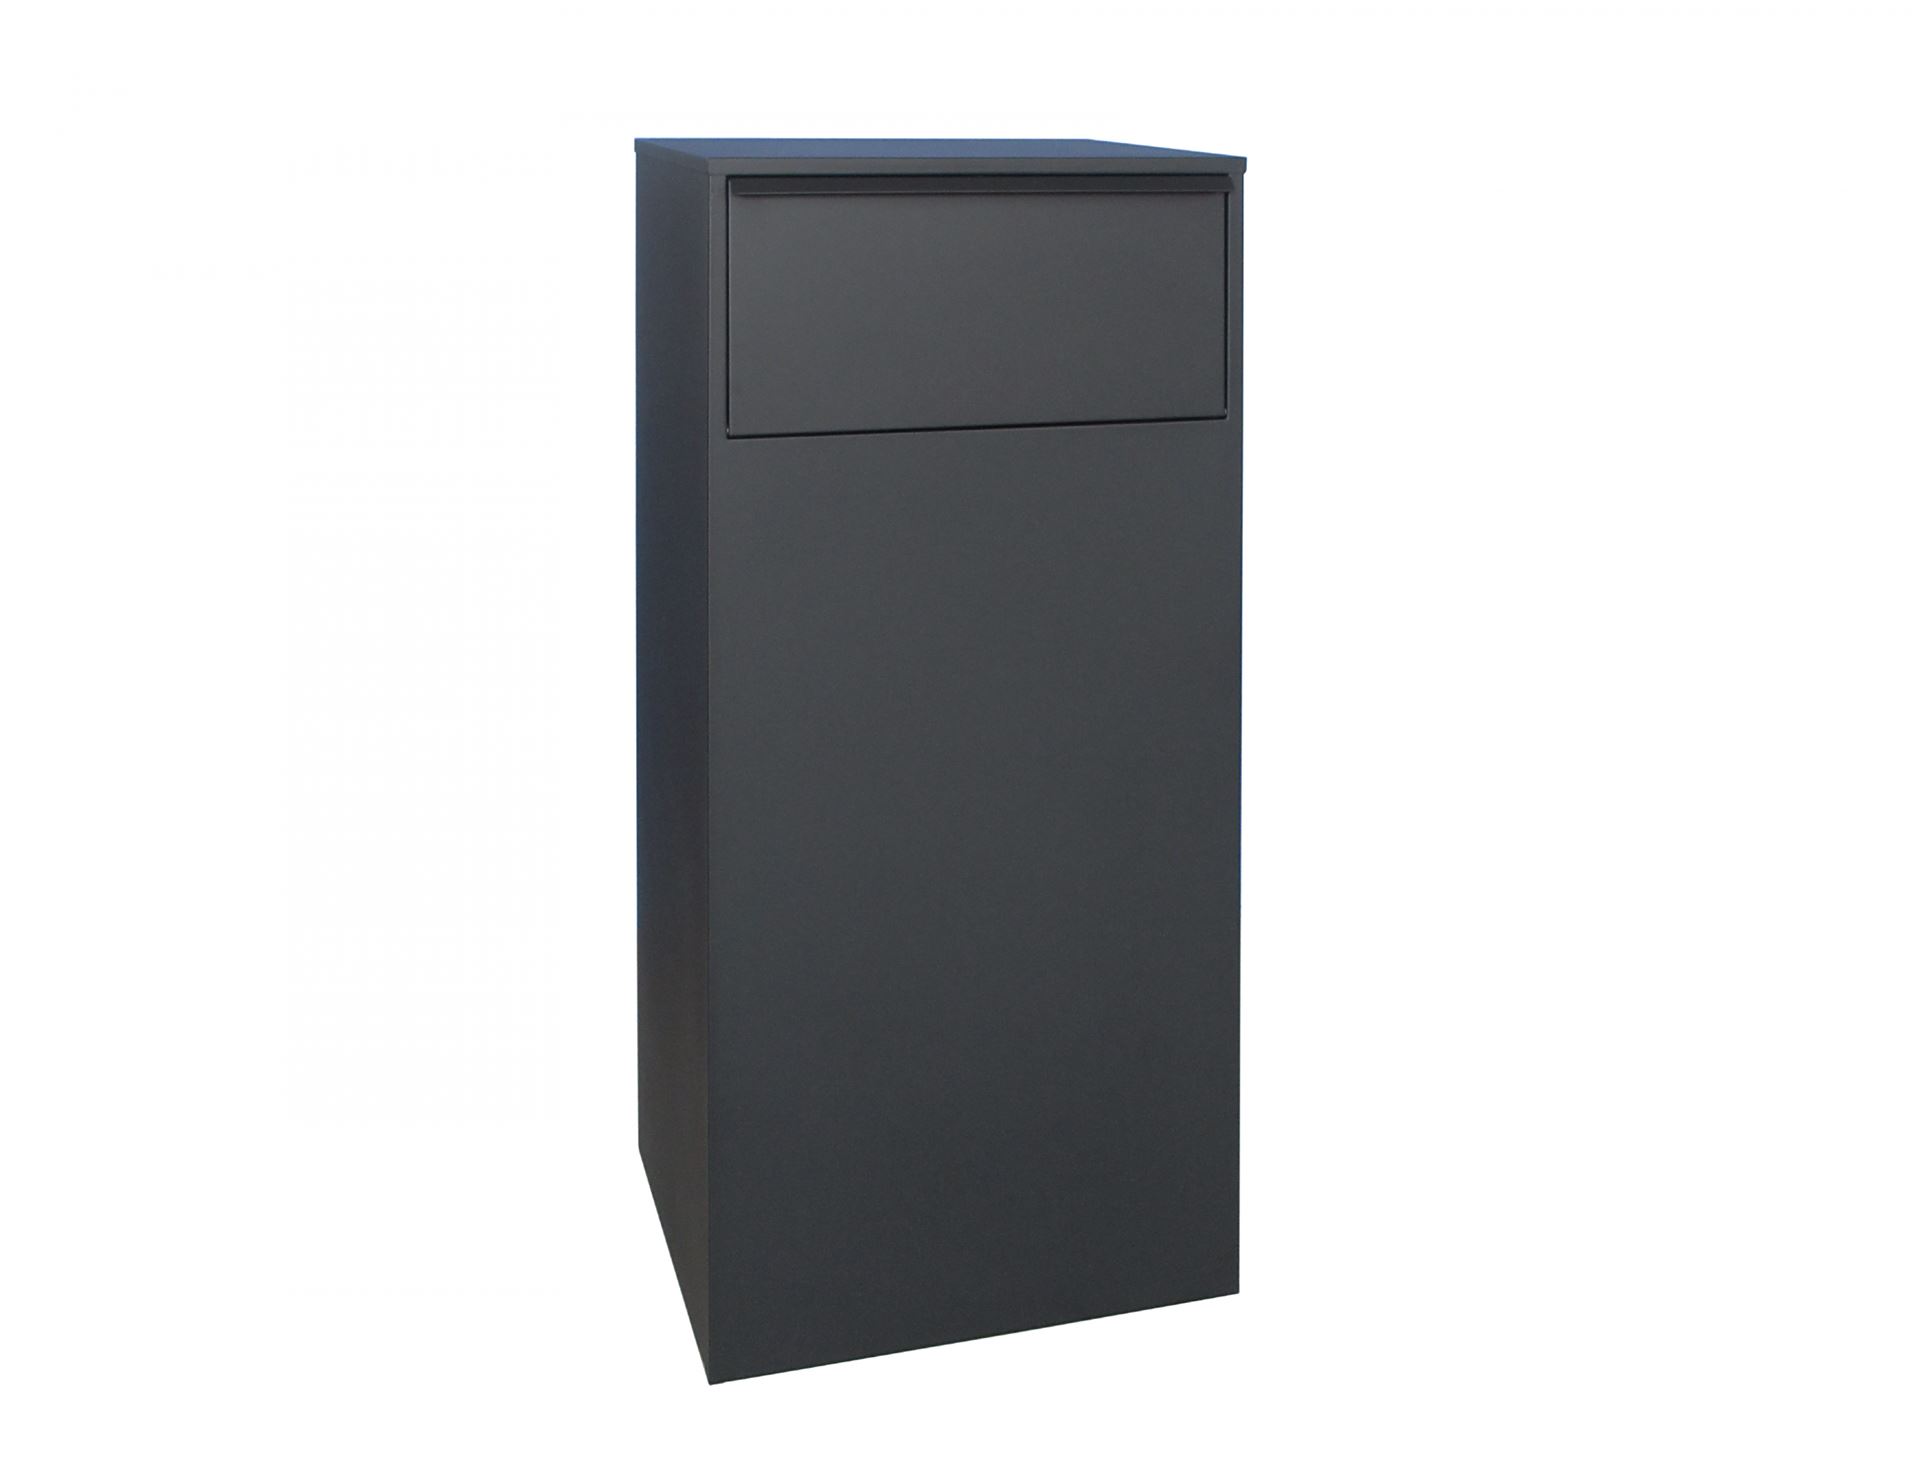 Practo Garden matte black XL package mailbox - For regular mail and packages - Includes cylinder lock with two keys and mounting hardware - Opening 21x41 cm - 100x44,5x37,5 cm